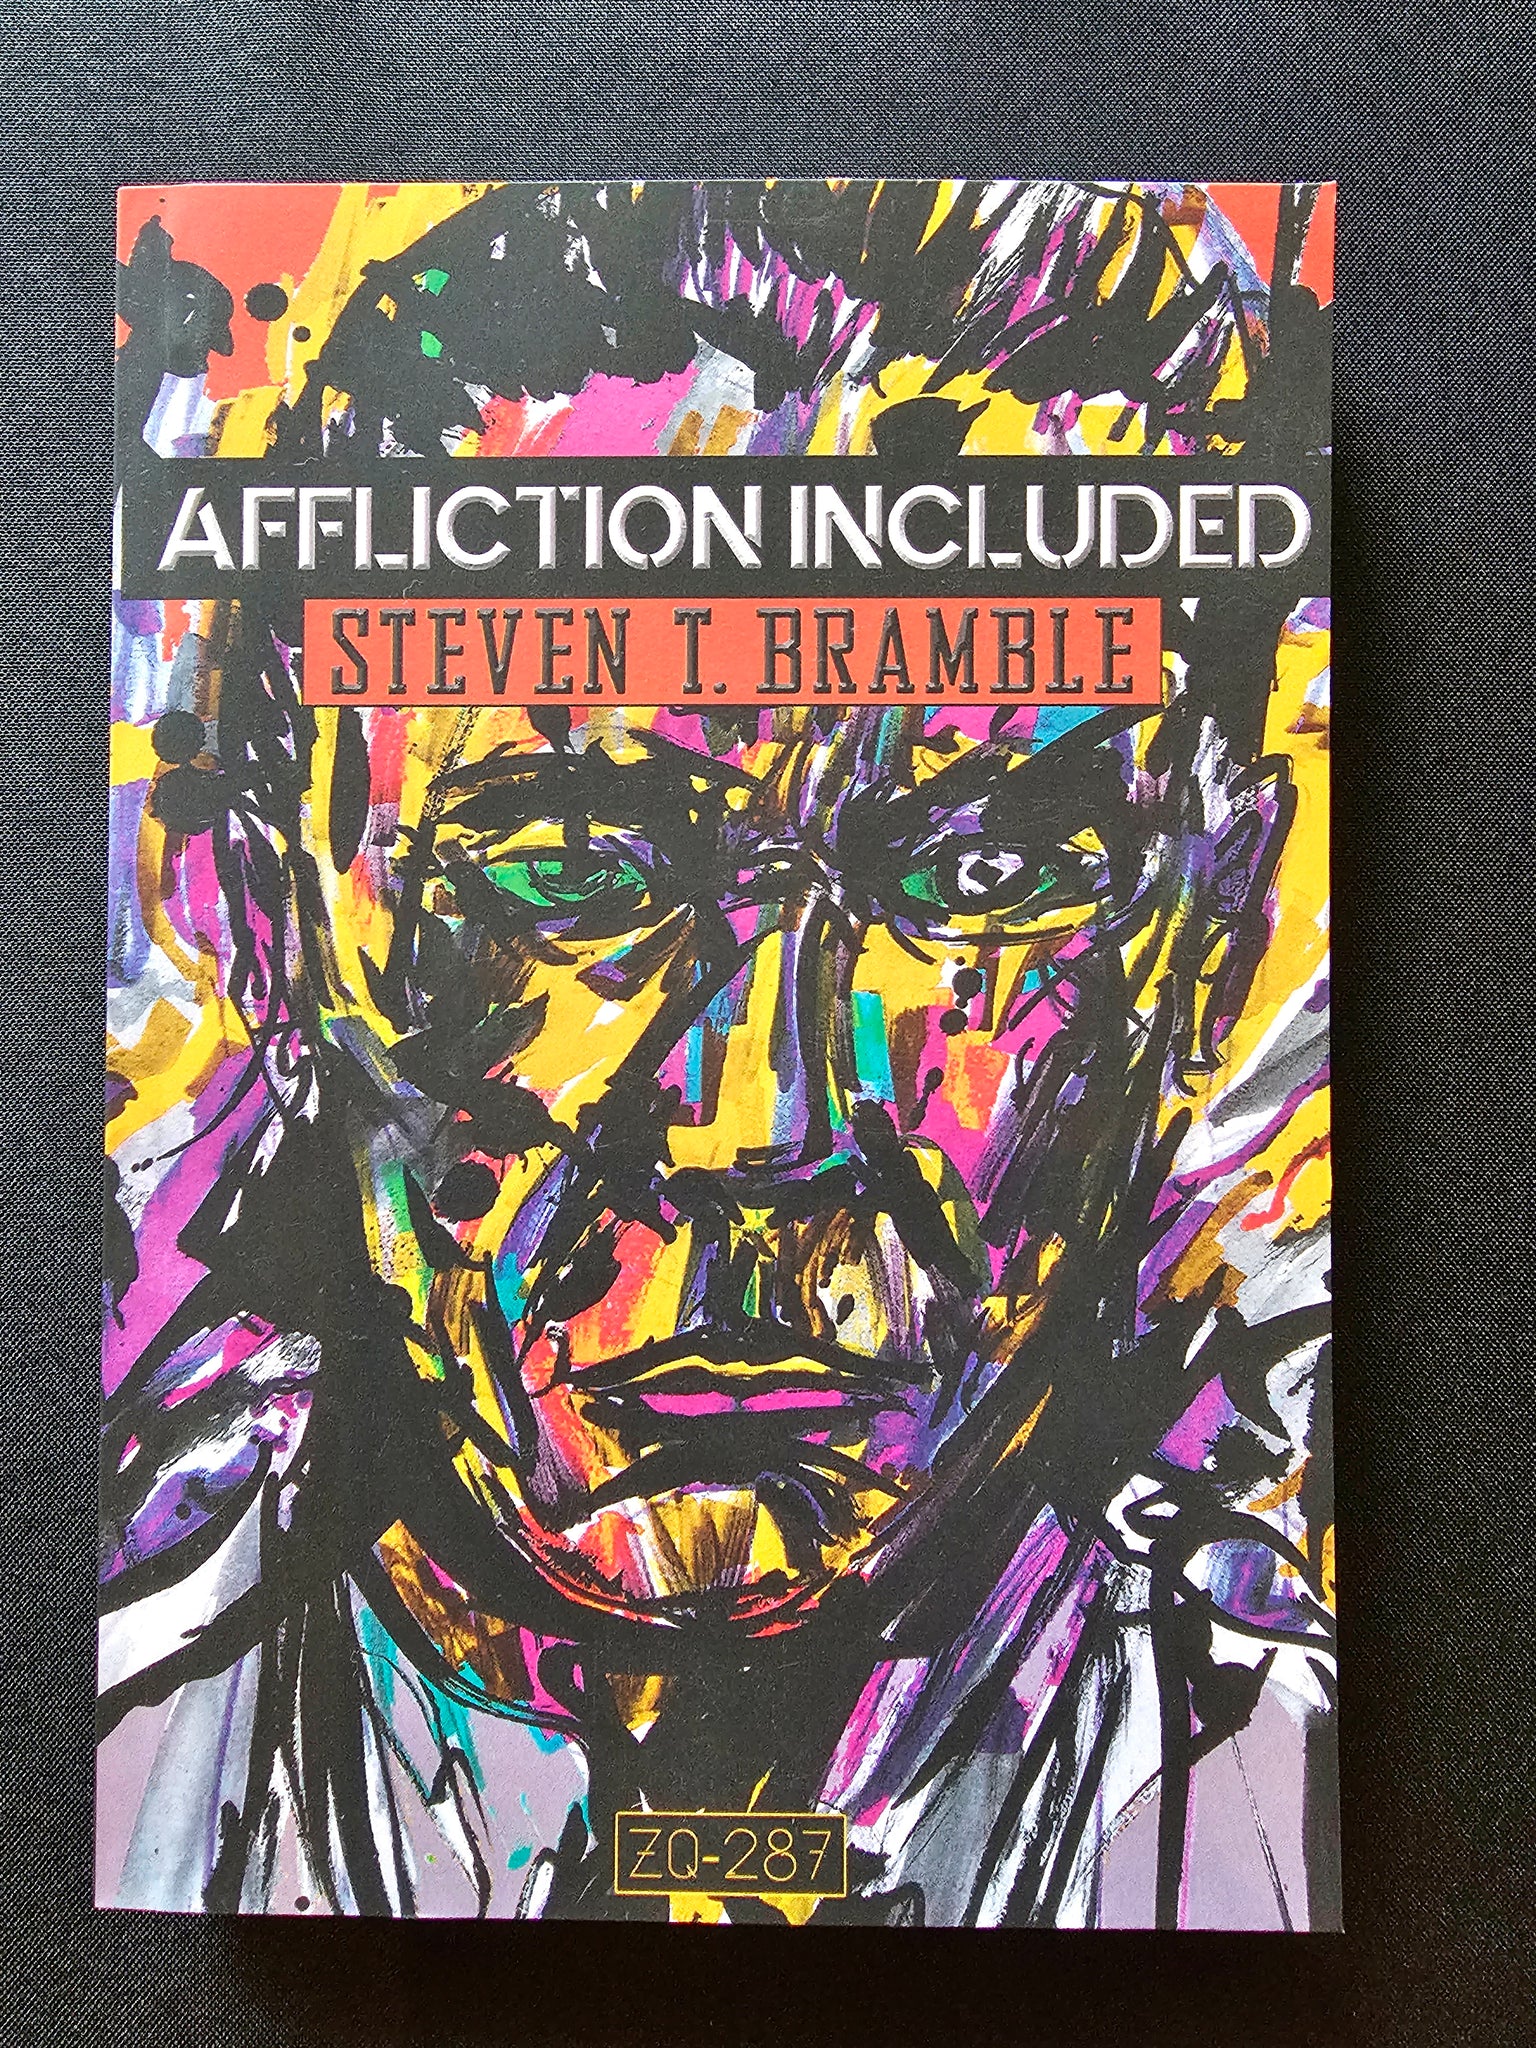 AFFLICTION INCLUDED by Steven T. Bramble